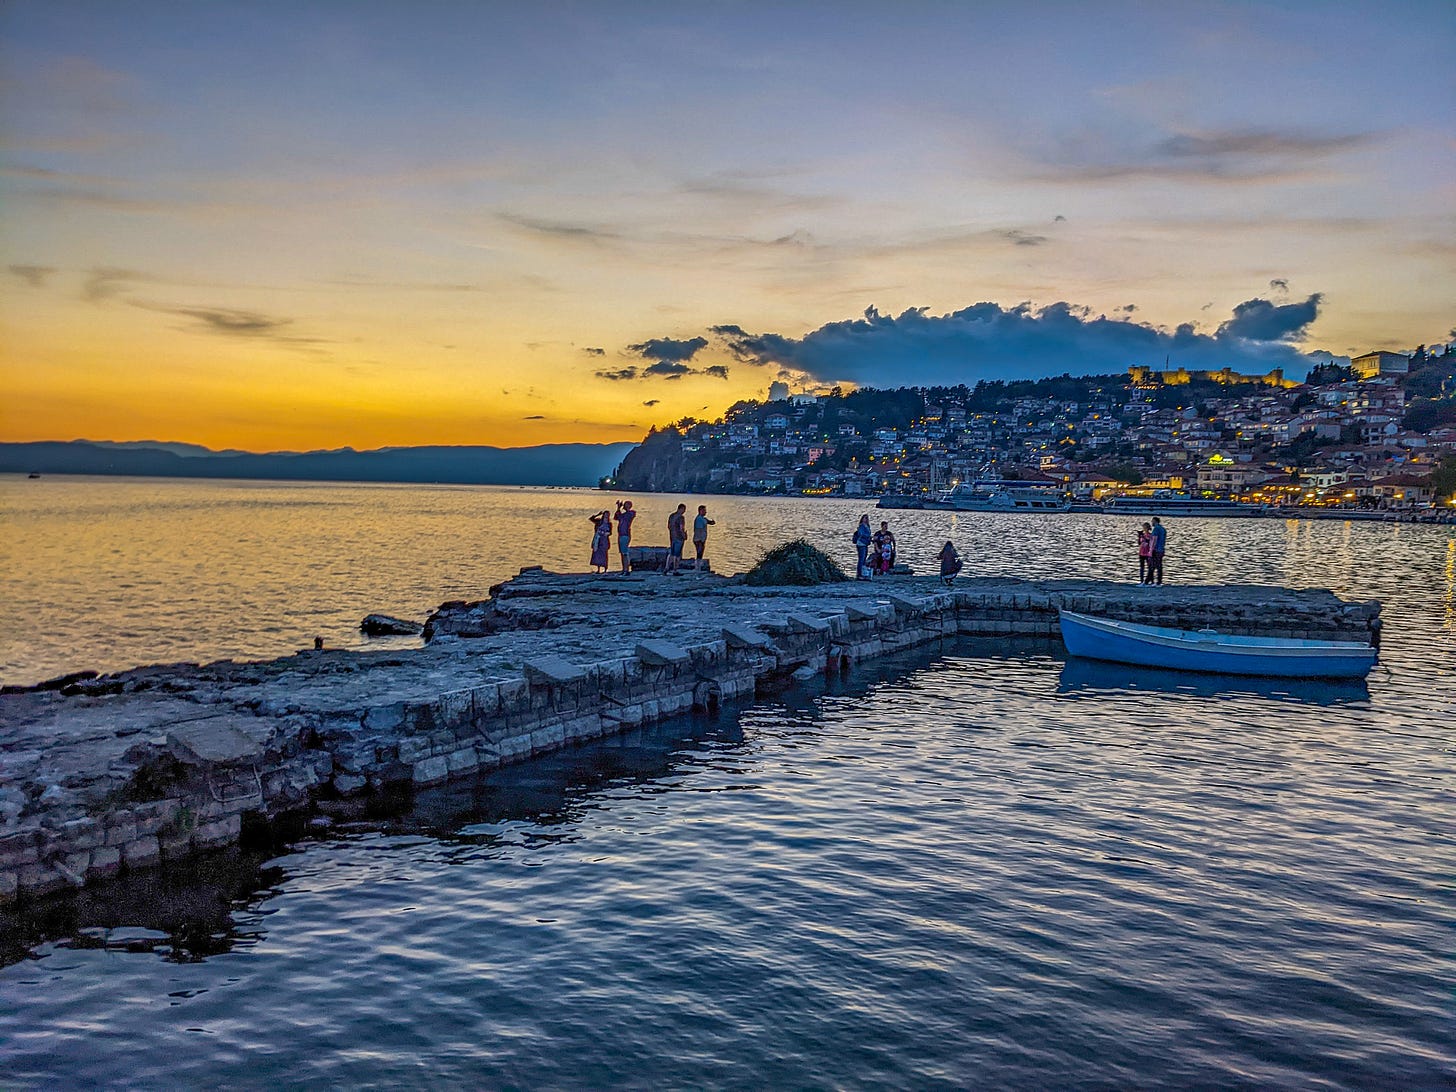 The town of Ohrid from the pier during sunset. The lights of the town are lit up and people on the pier are silhouetted.